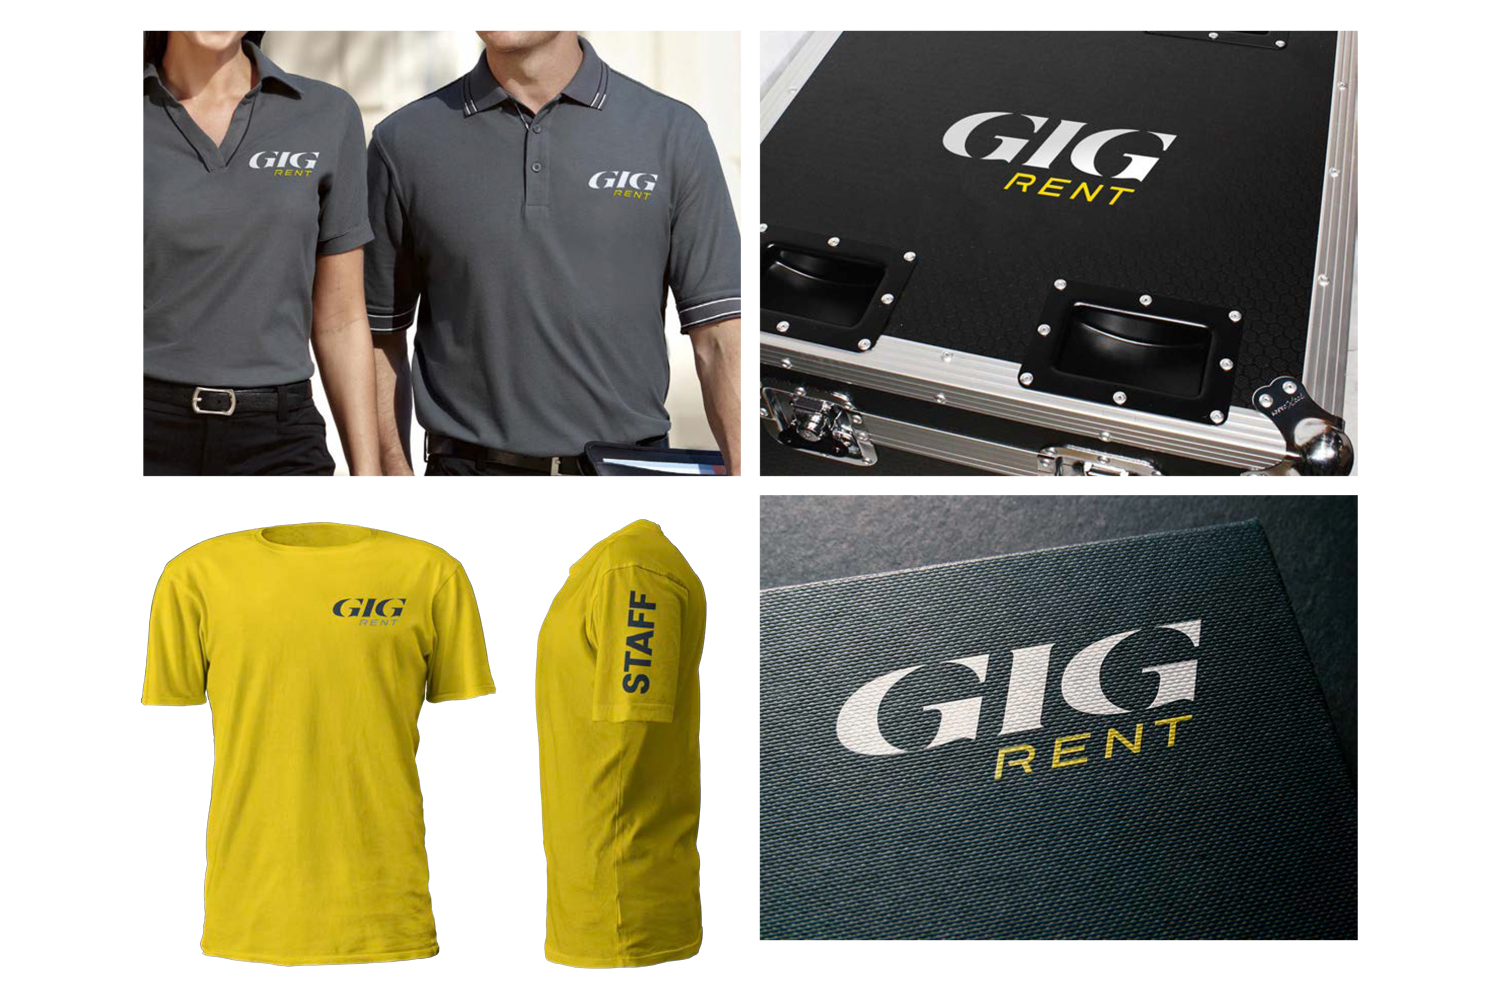 Mockup of GigRent apparel options, including gray tshirt, yellow tshirt, and vinyl sticker